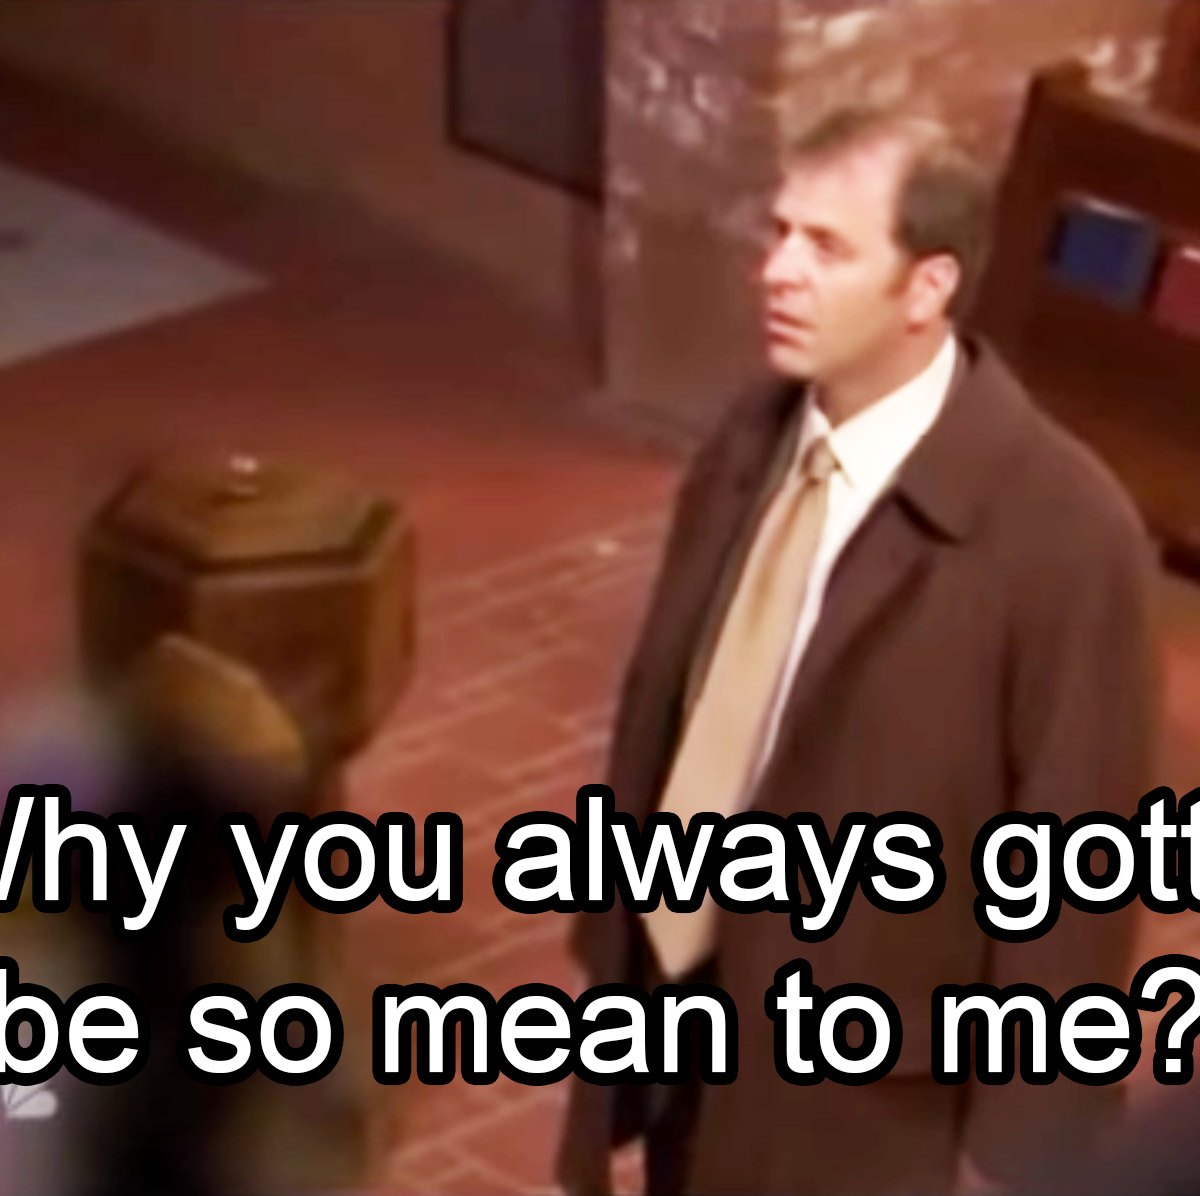 TOBY FLENDERSON: The Office character 